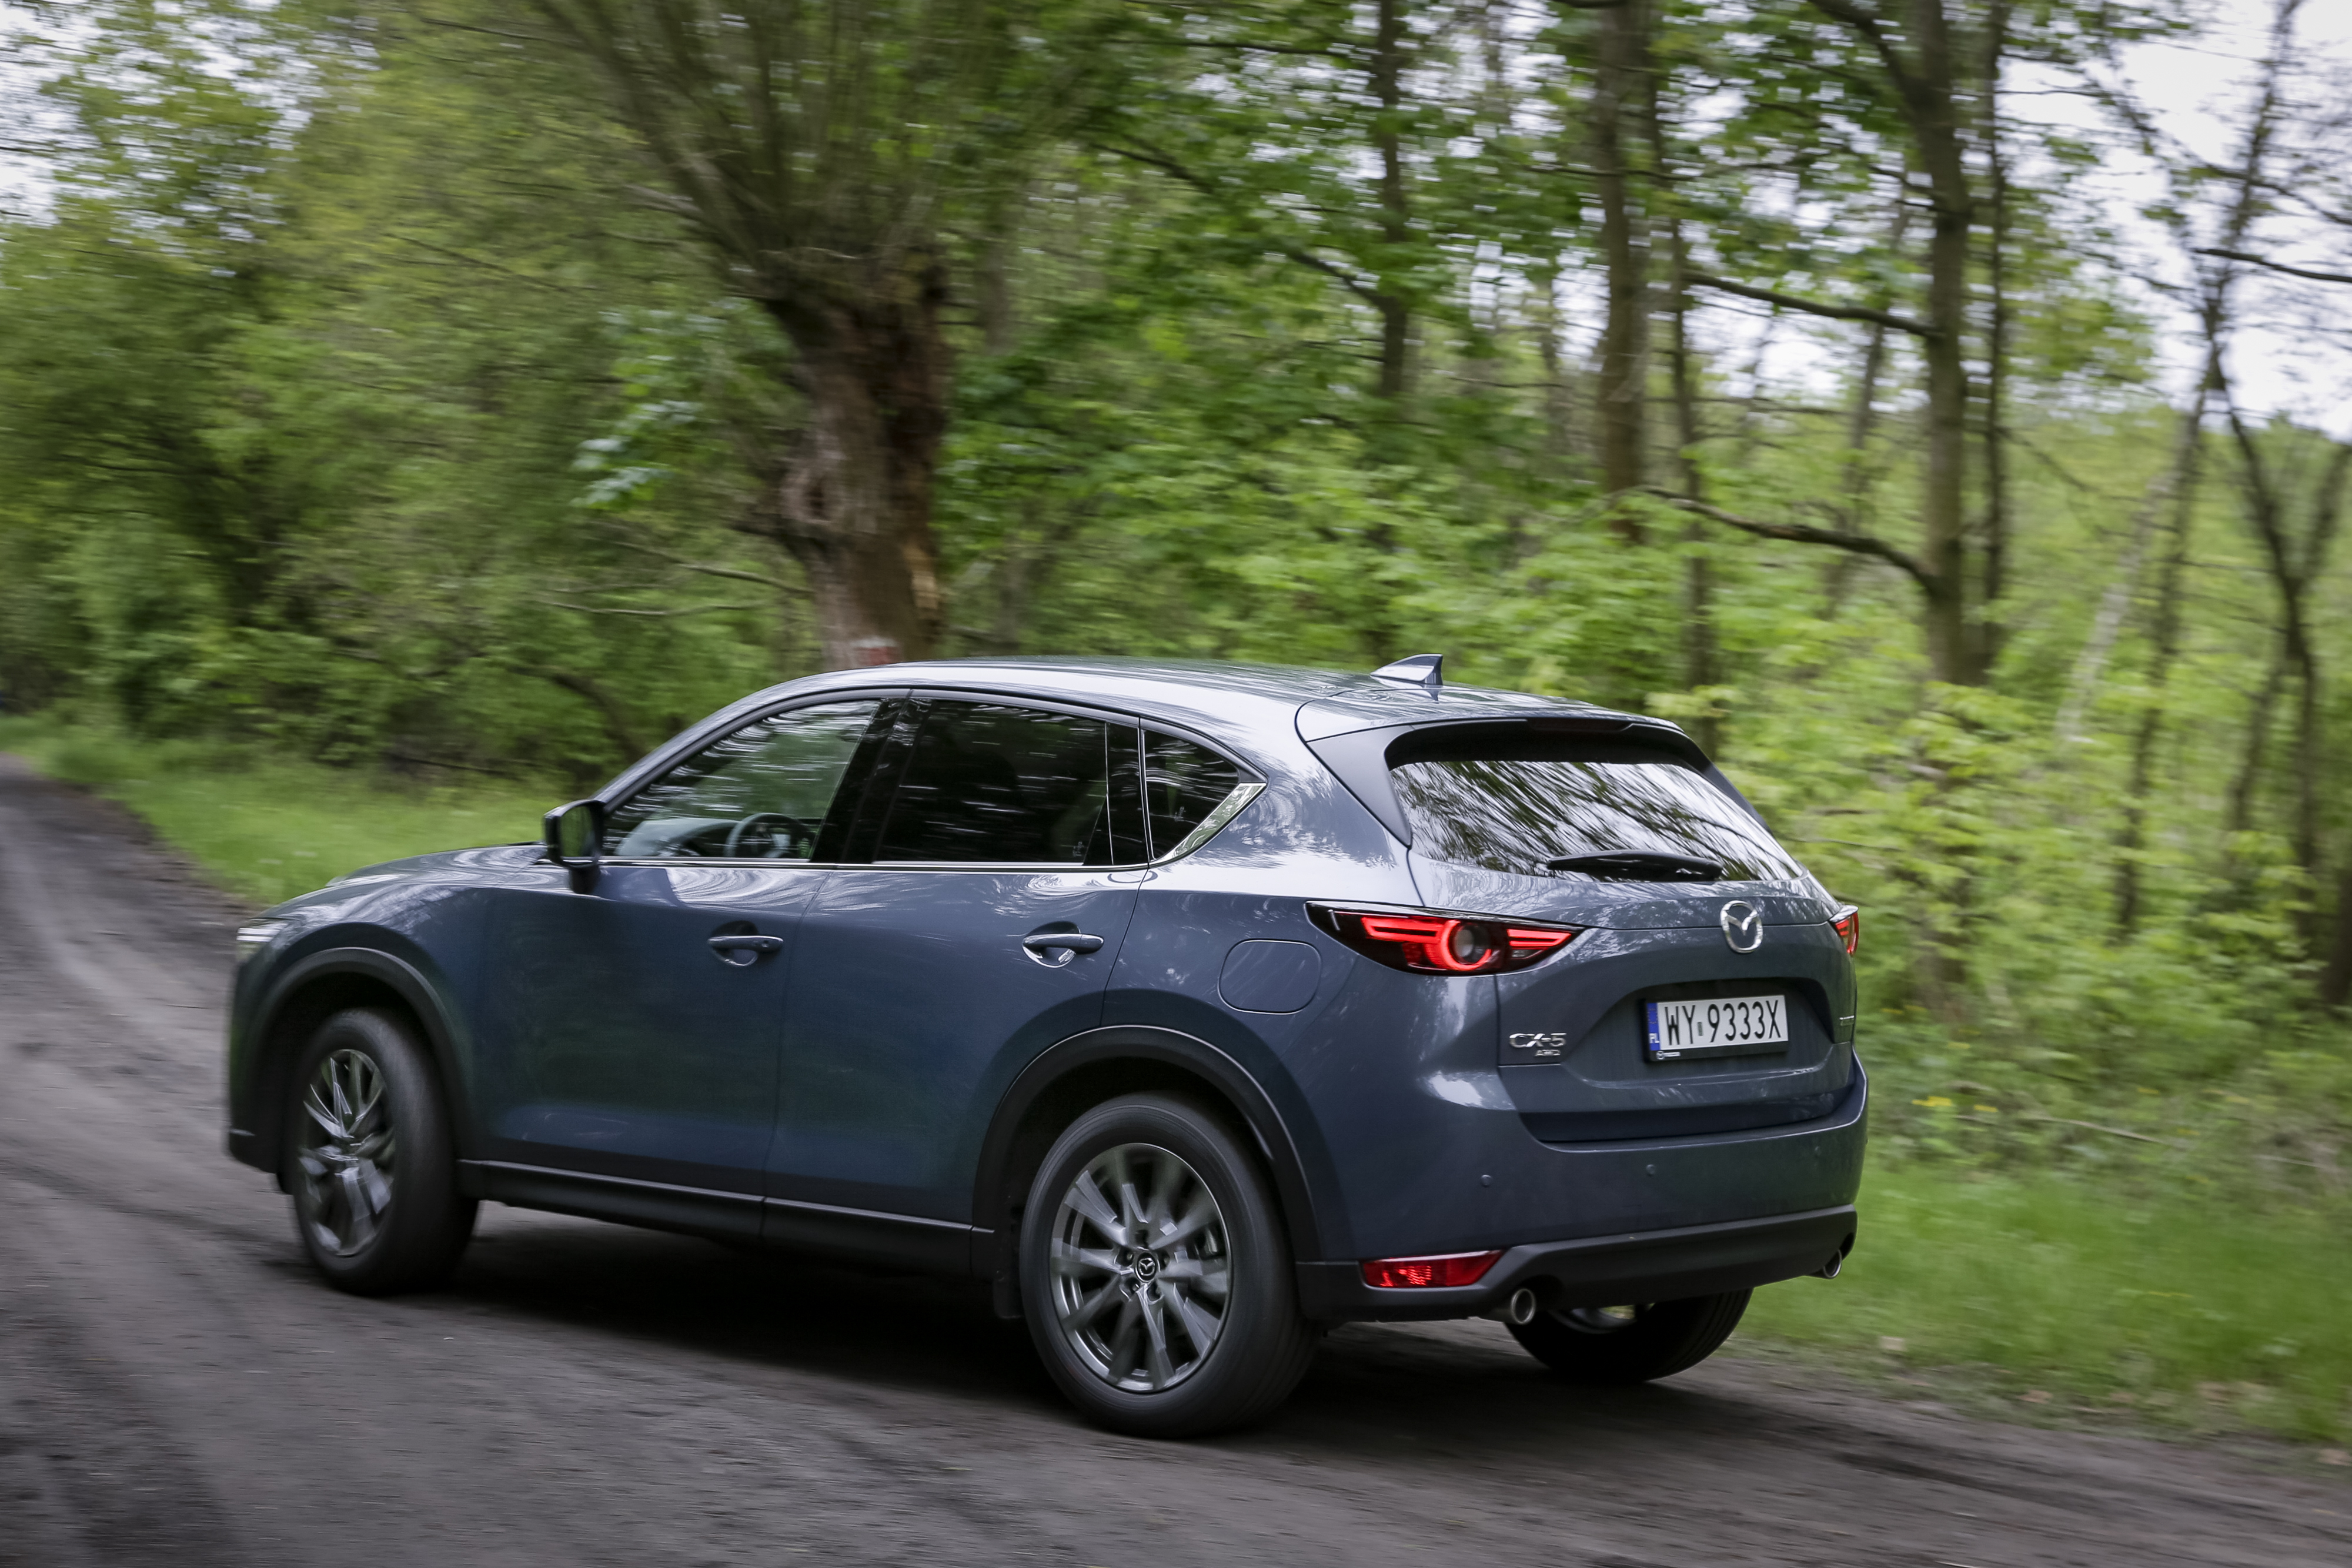 2020 Mazda CX5 in Europe new Polymetal Grey, cylinder deactivation, improved refinement and